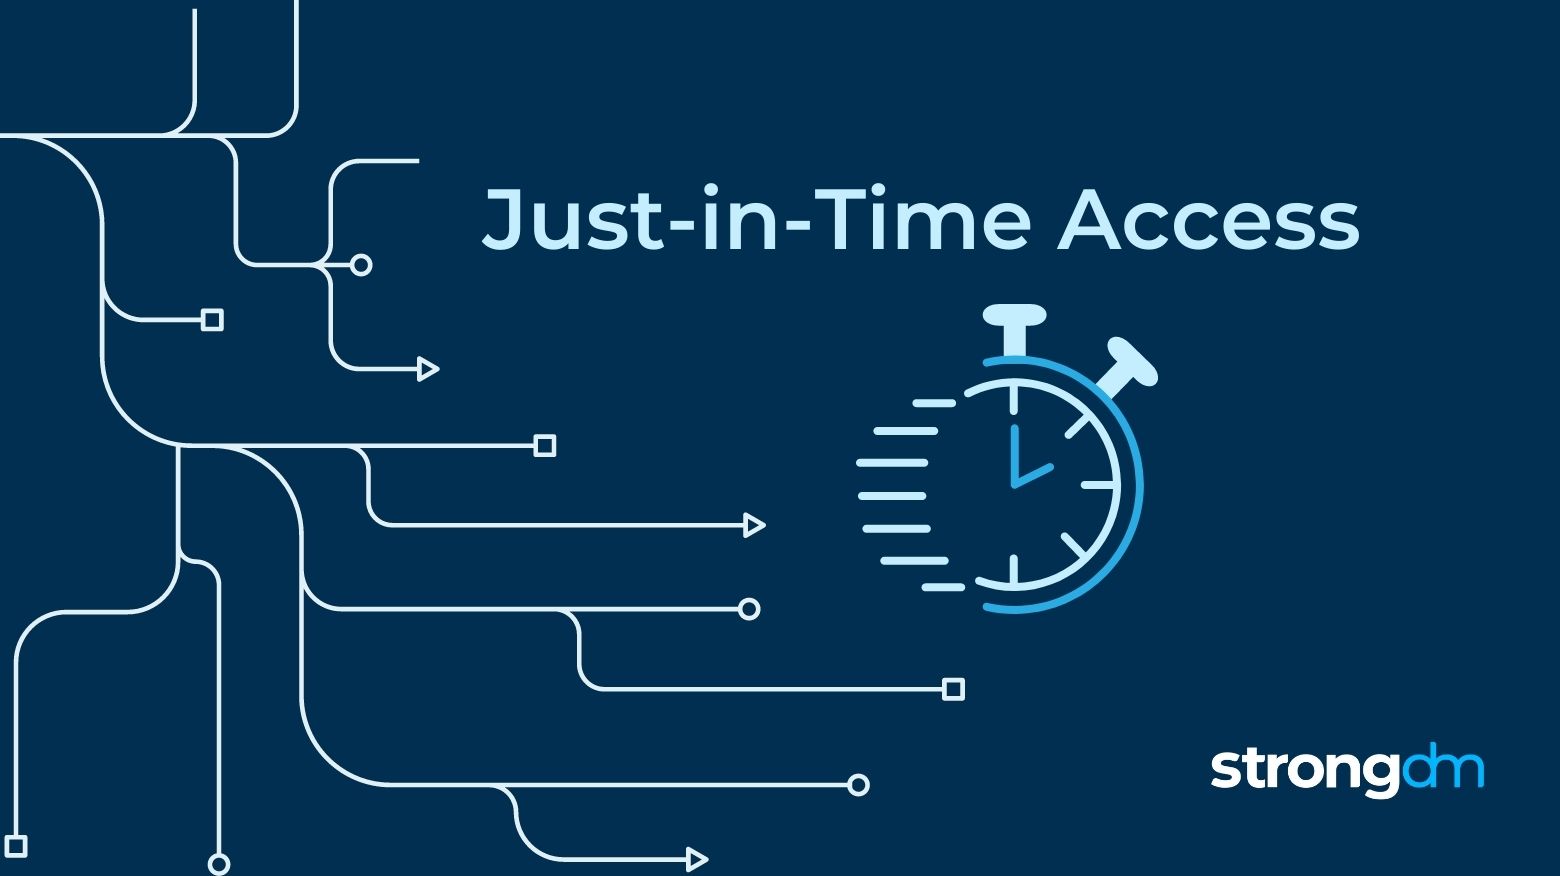 Just-In-Time Access (JIT): Meaning, Benefits, Types & More